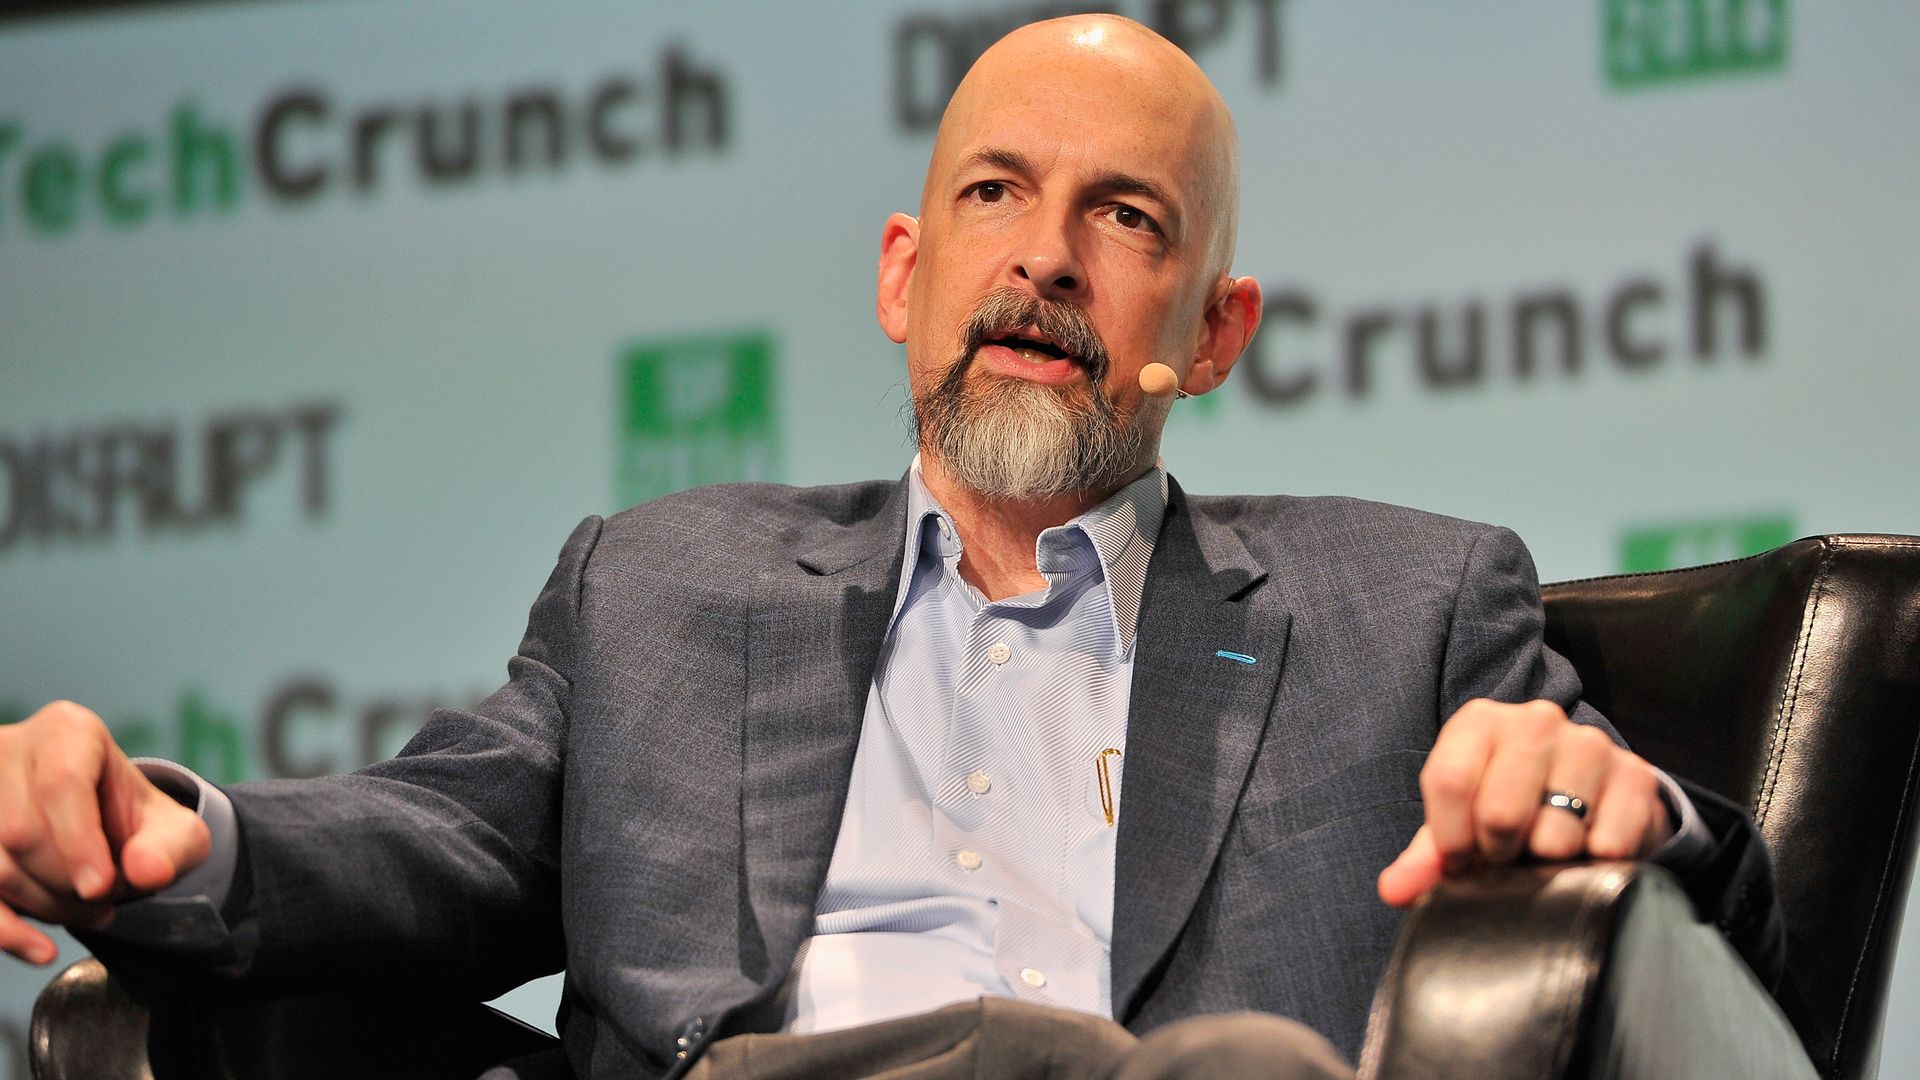 Photo of author Neal Stephenson talking onstage at TechCrunch, wearing a sport jacket